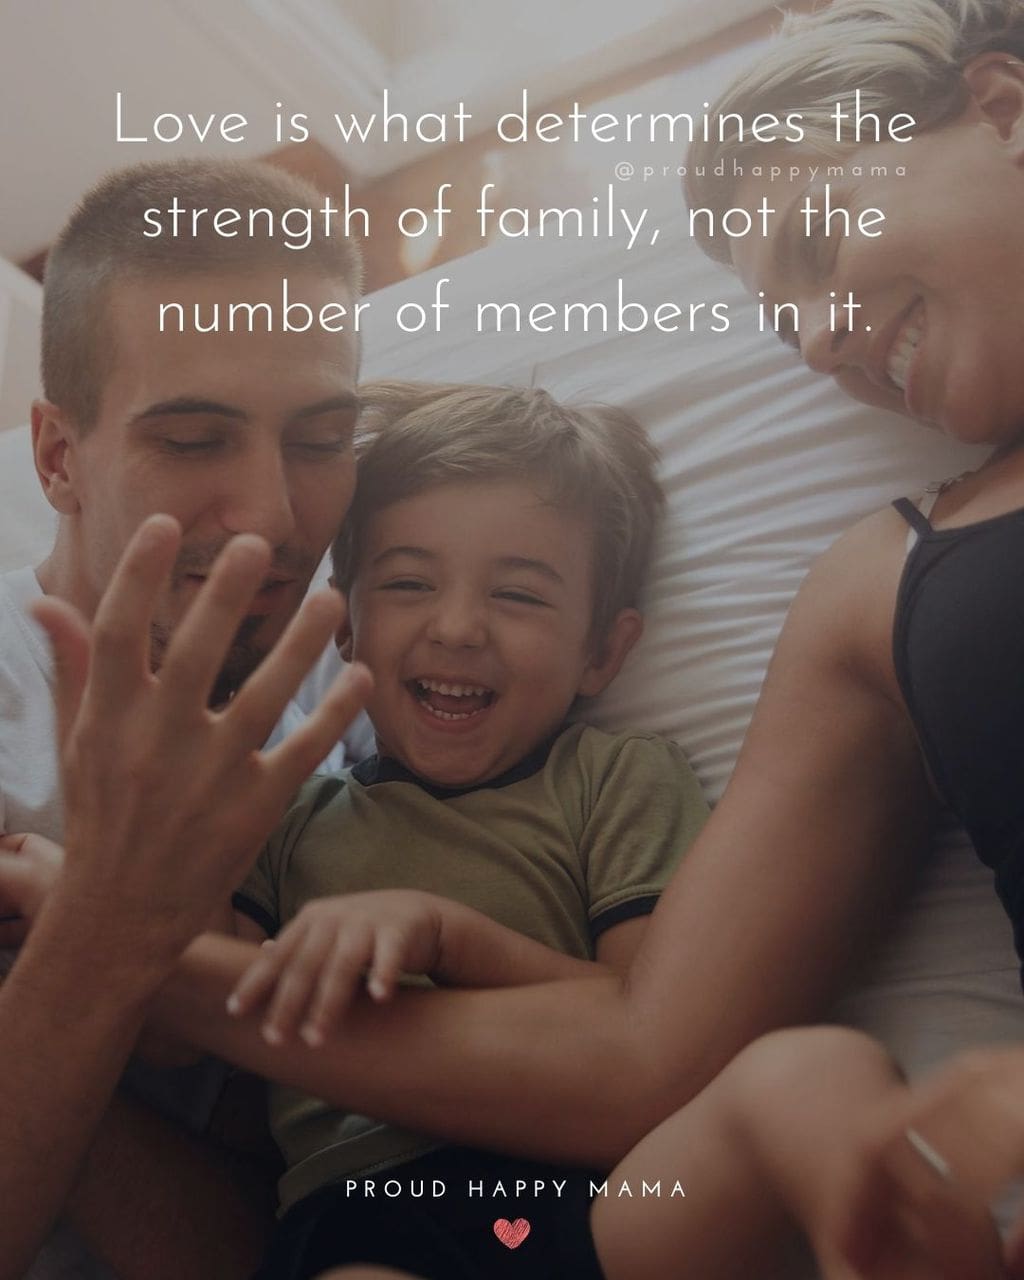 Love Quotes To Family | Love is what determines the strength of family, not the number of members in it.